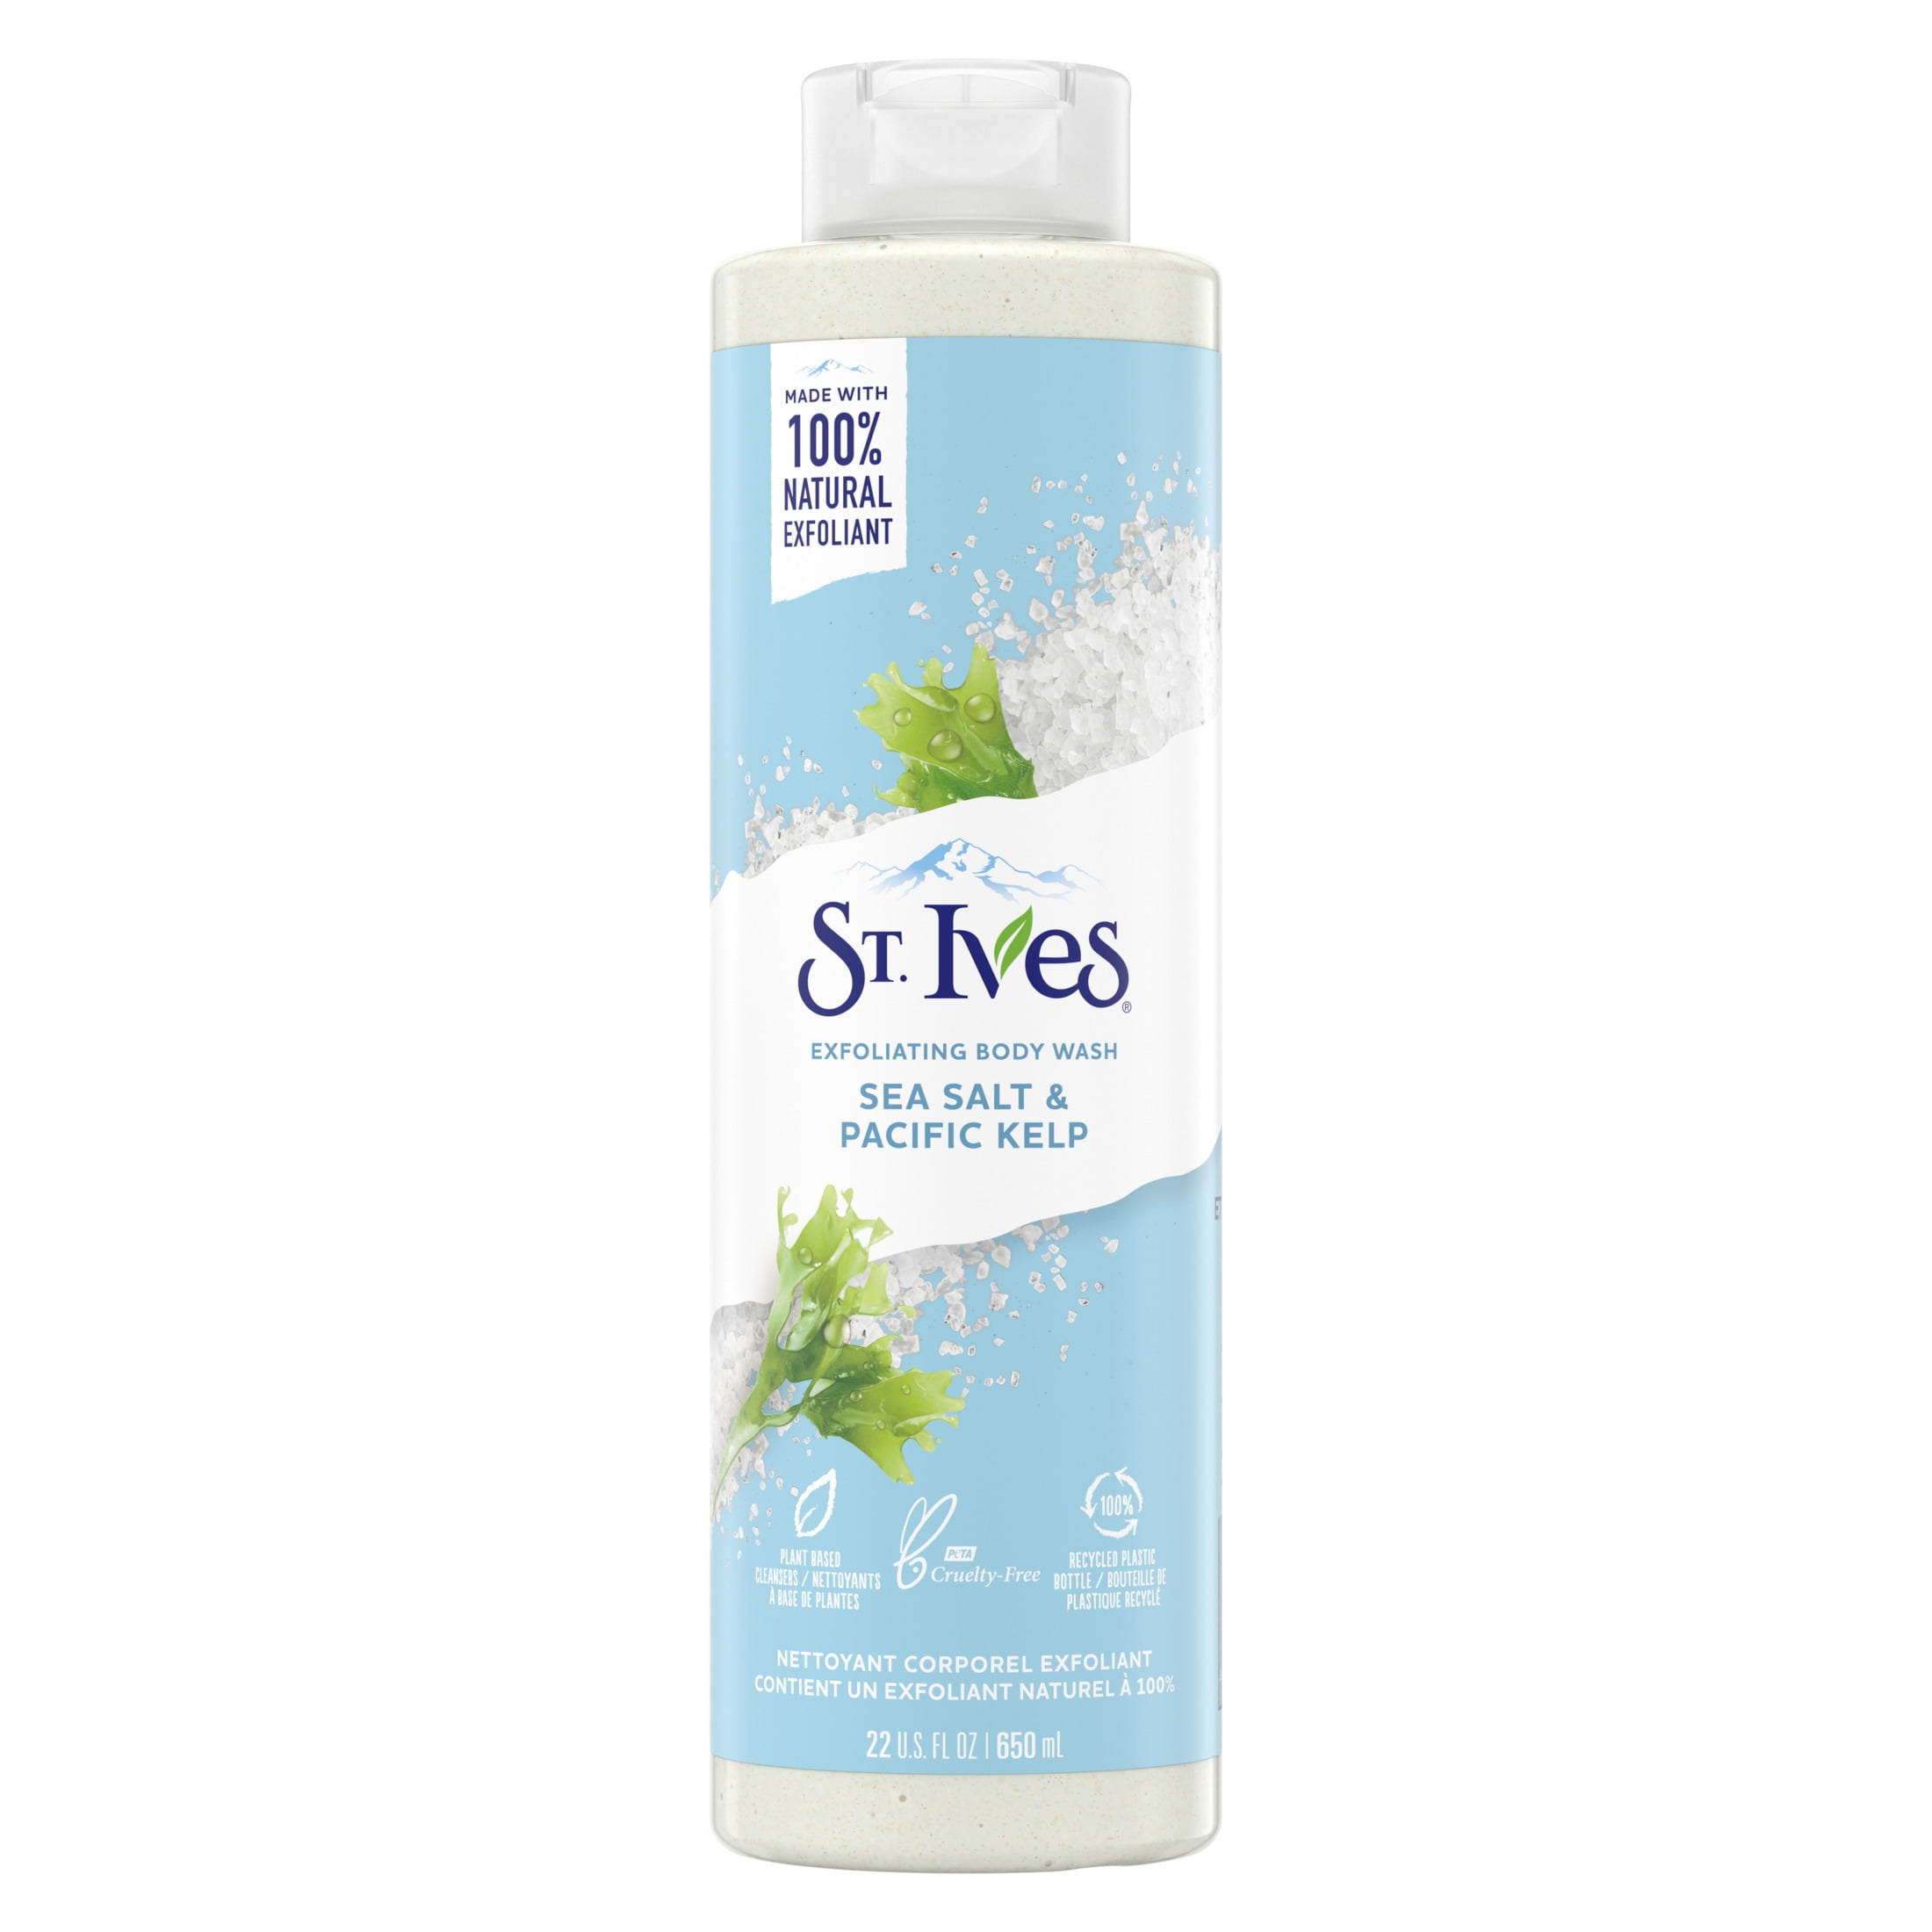 St. Ives Sea Salt and Pacific Kelp Exfoliating Body Wash 22 oz